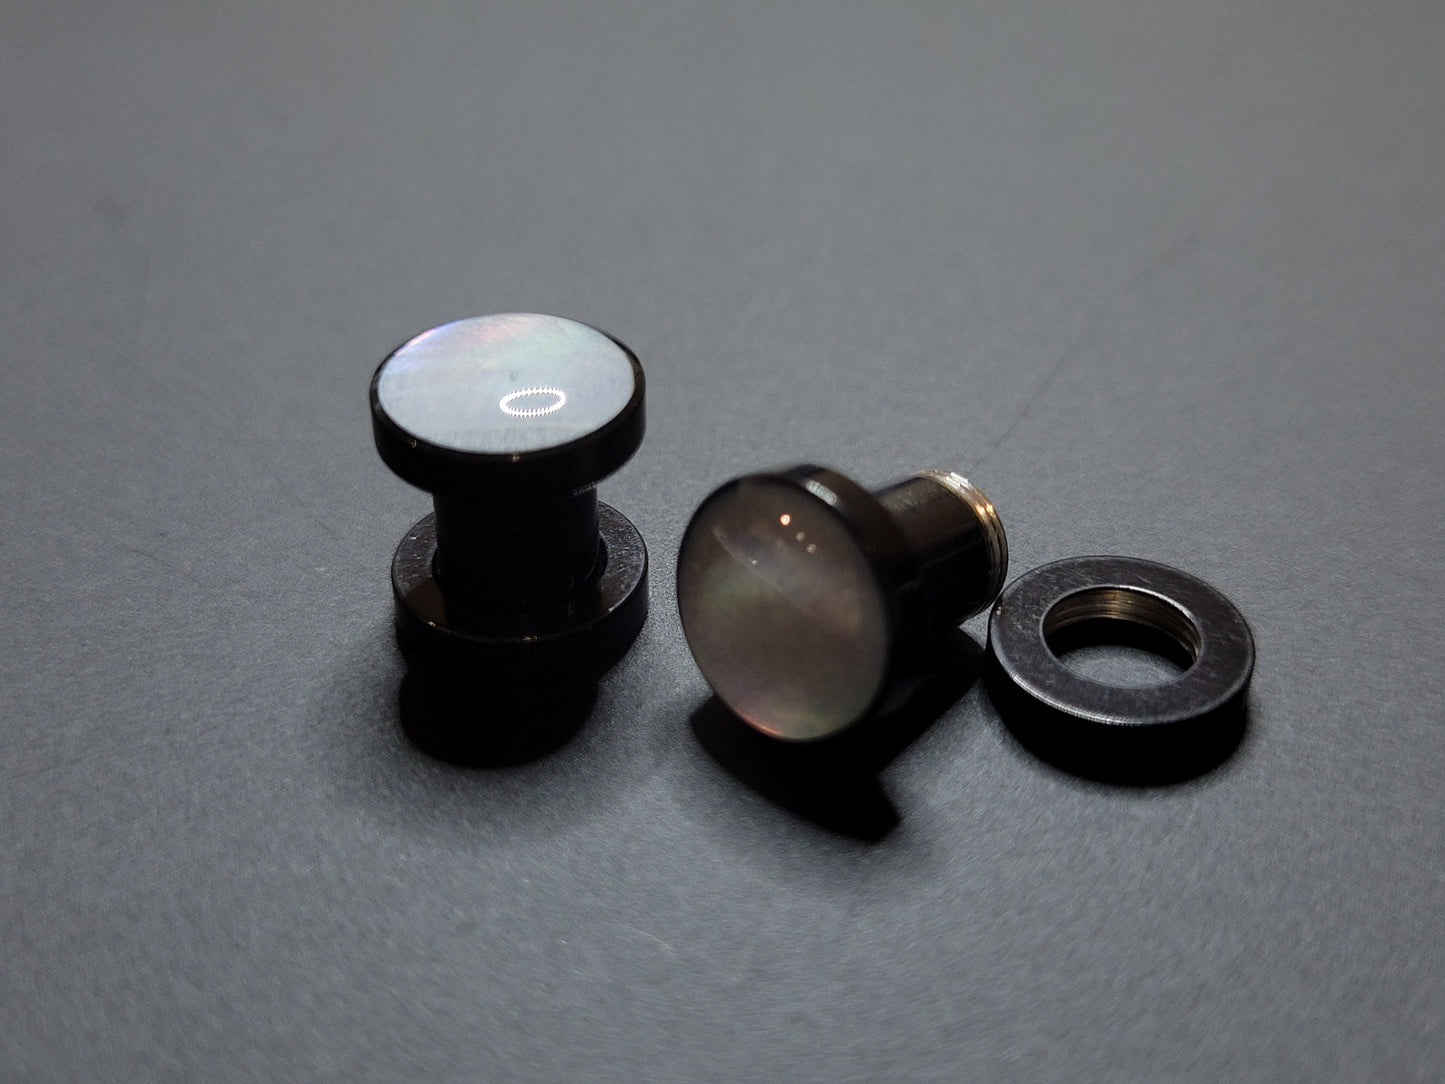 Holographic Stainless Steel Plugs - Pair 2